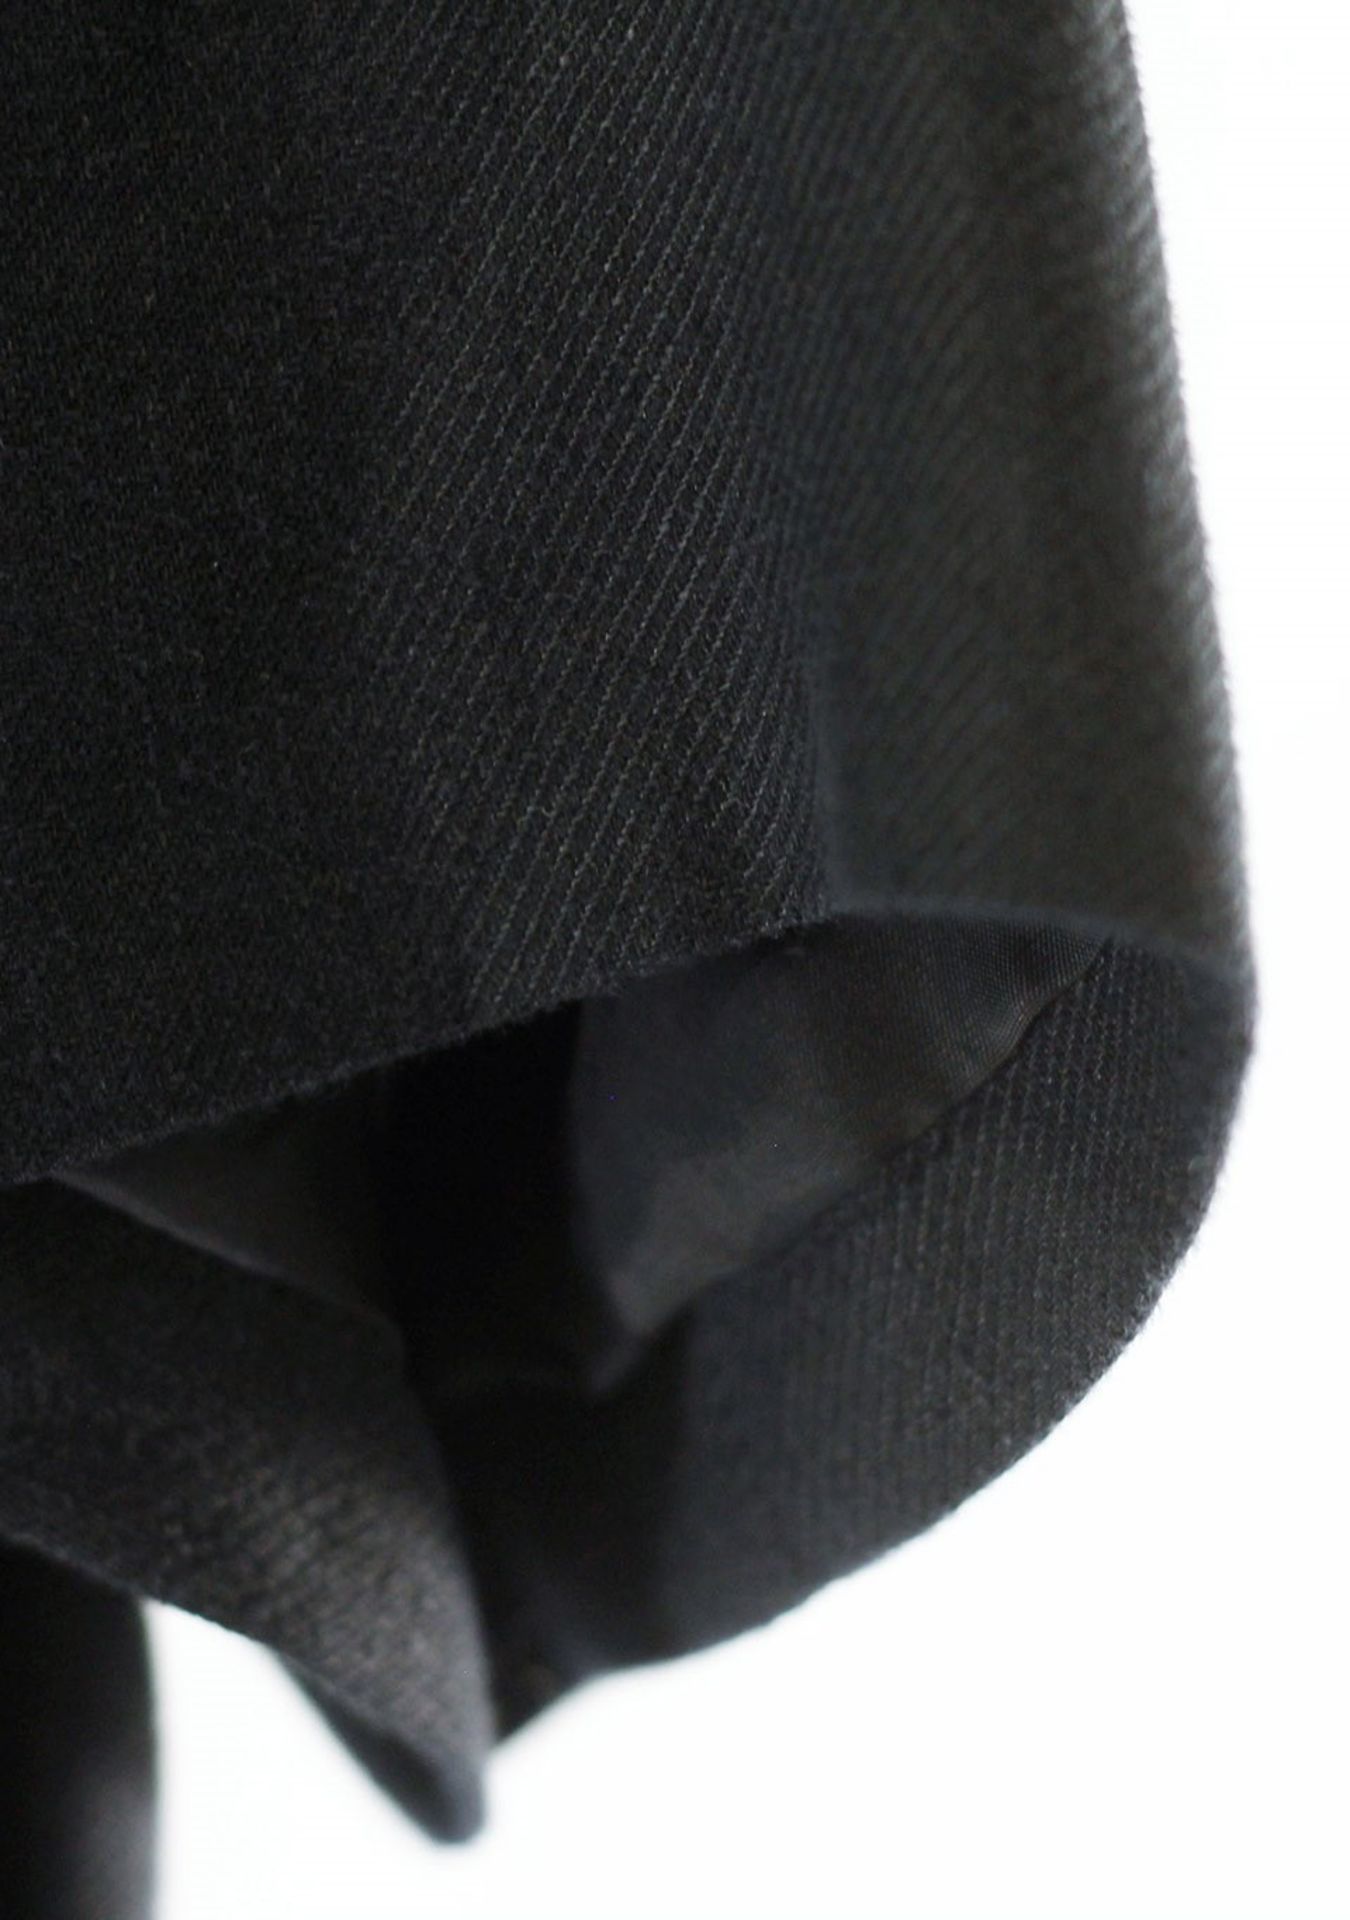 1 x Natan Black Bolero - Size: 10 - Material: 100% Linen - From a High End Clothing Boutique In - Image 8 of 10